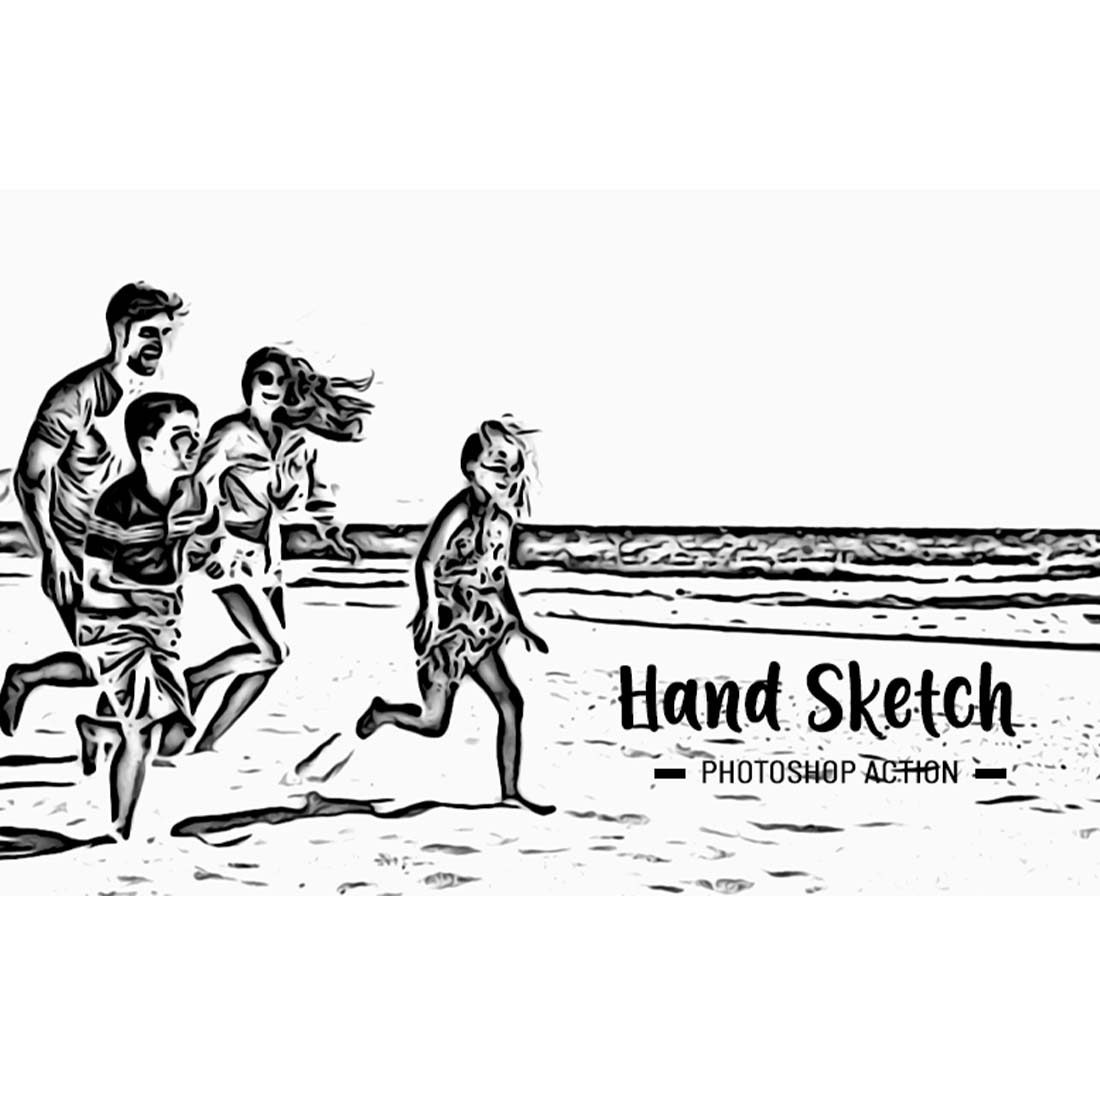 Hand Sketch Photoshop Action cover image.